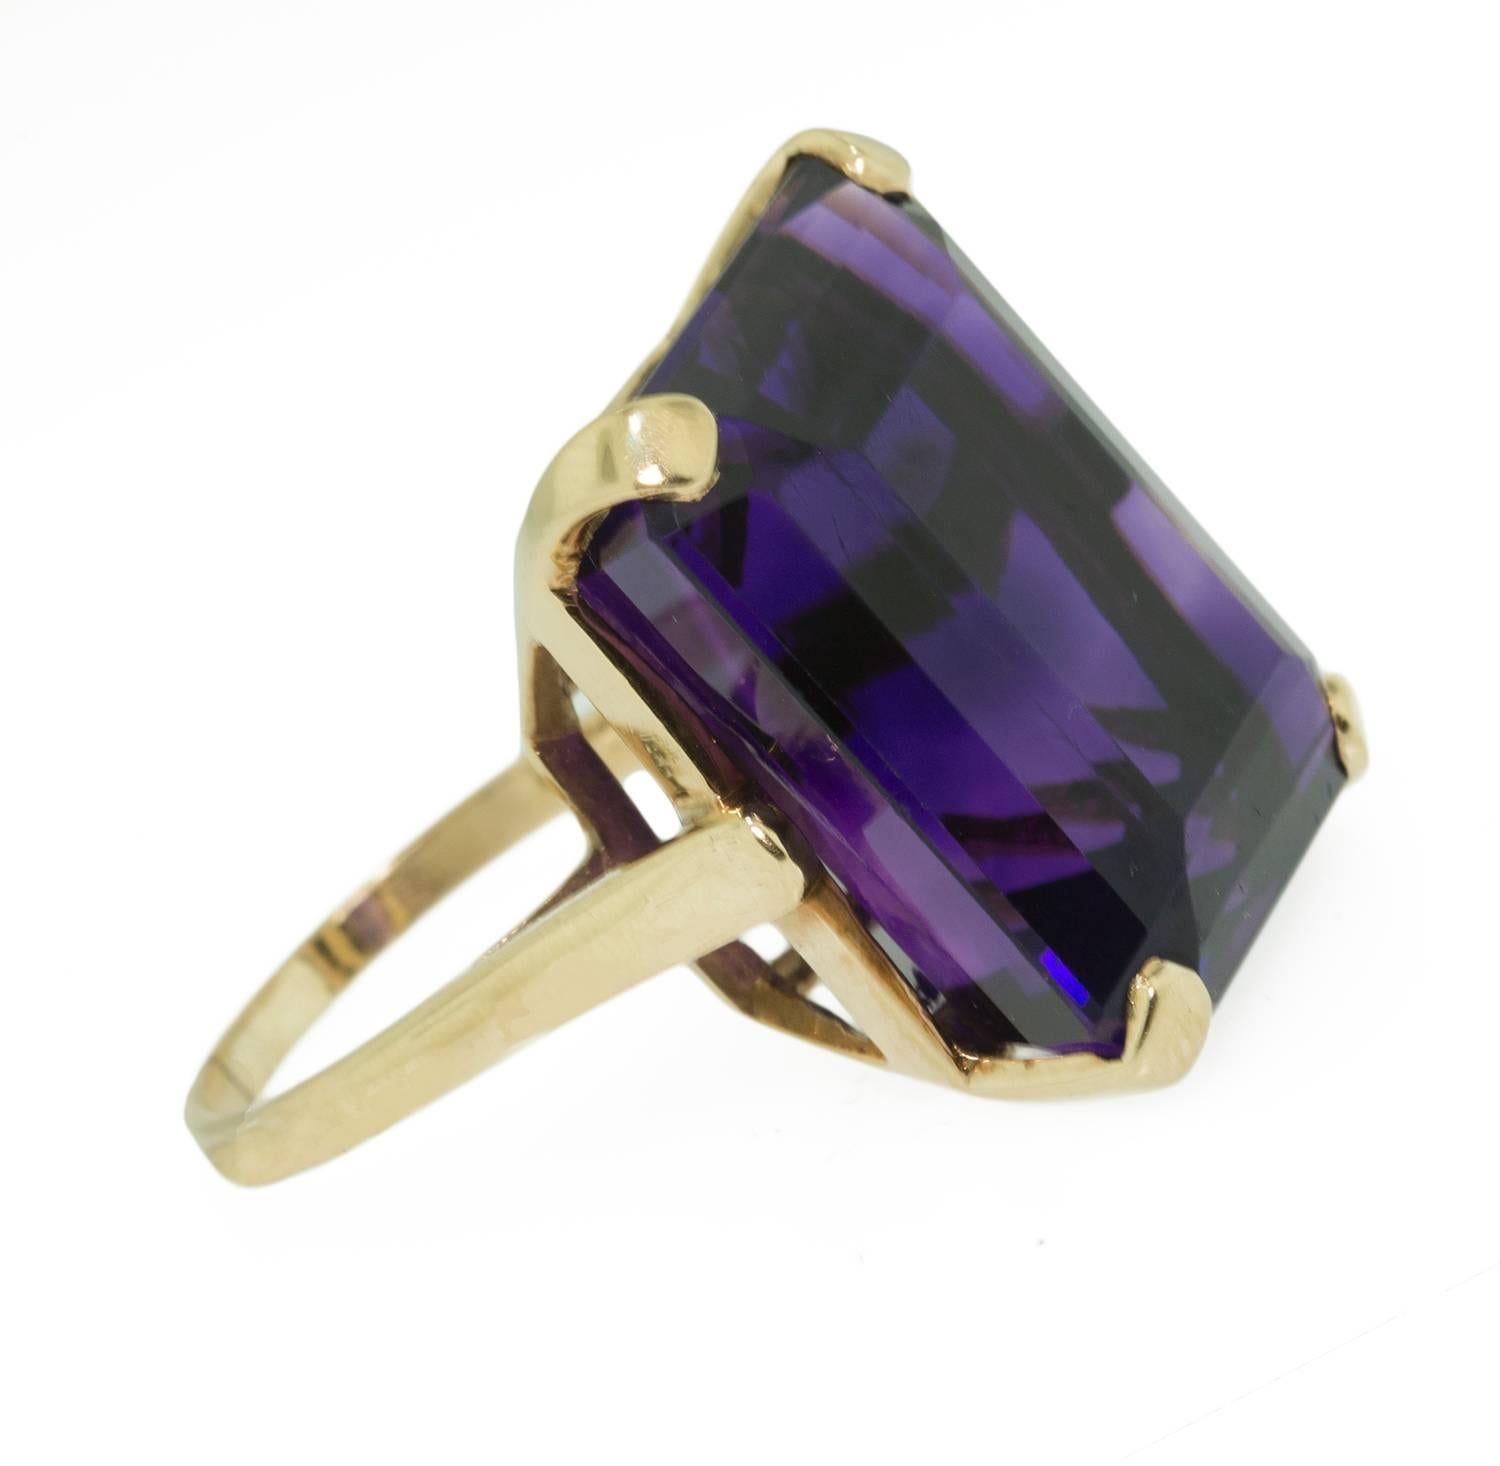 This large, dramatic amethyst ring is an intense deep purple. It is set in a custom made high basket 14k yellow gold mount. This ring is large and striking on the finger. It measures size 6 and in excellent condition.